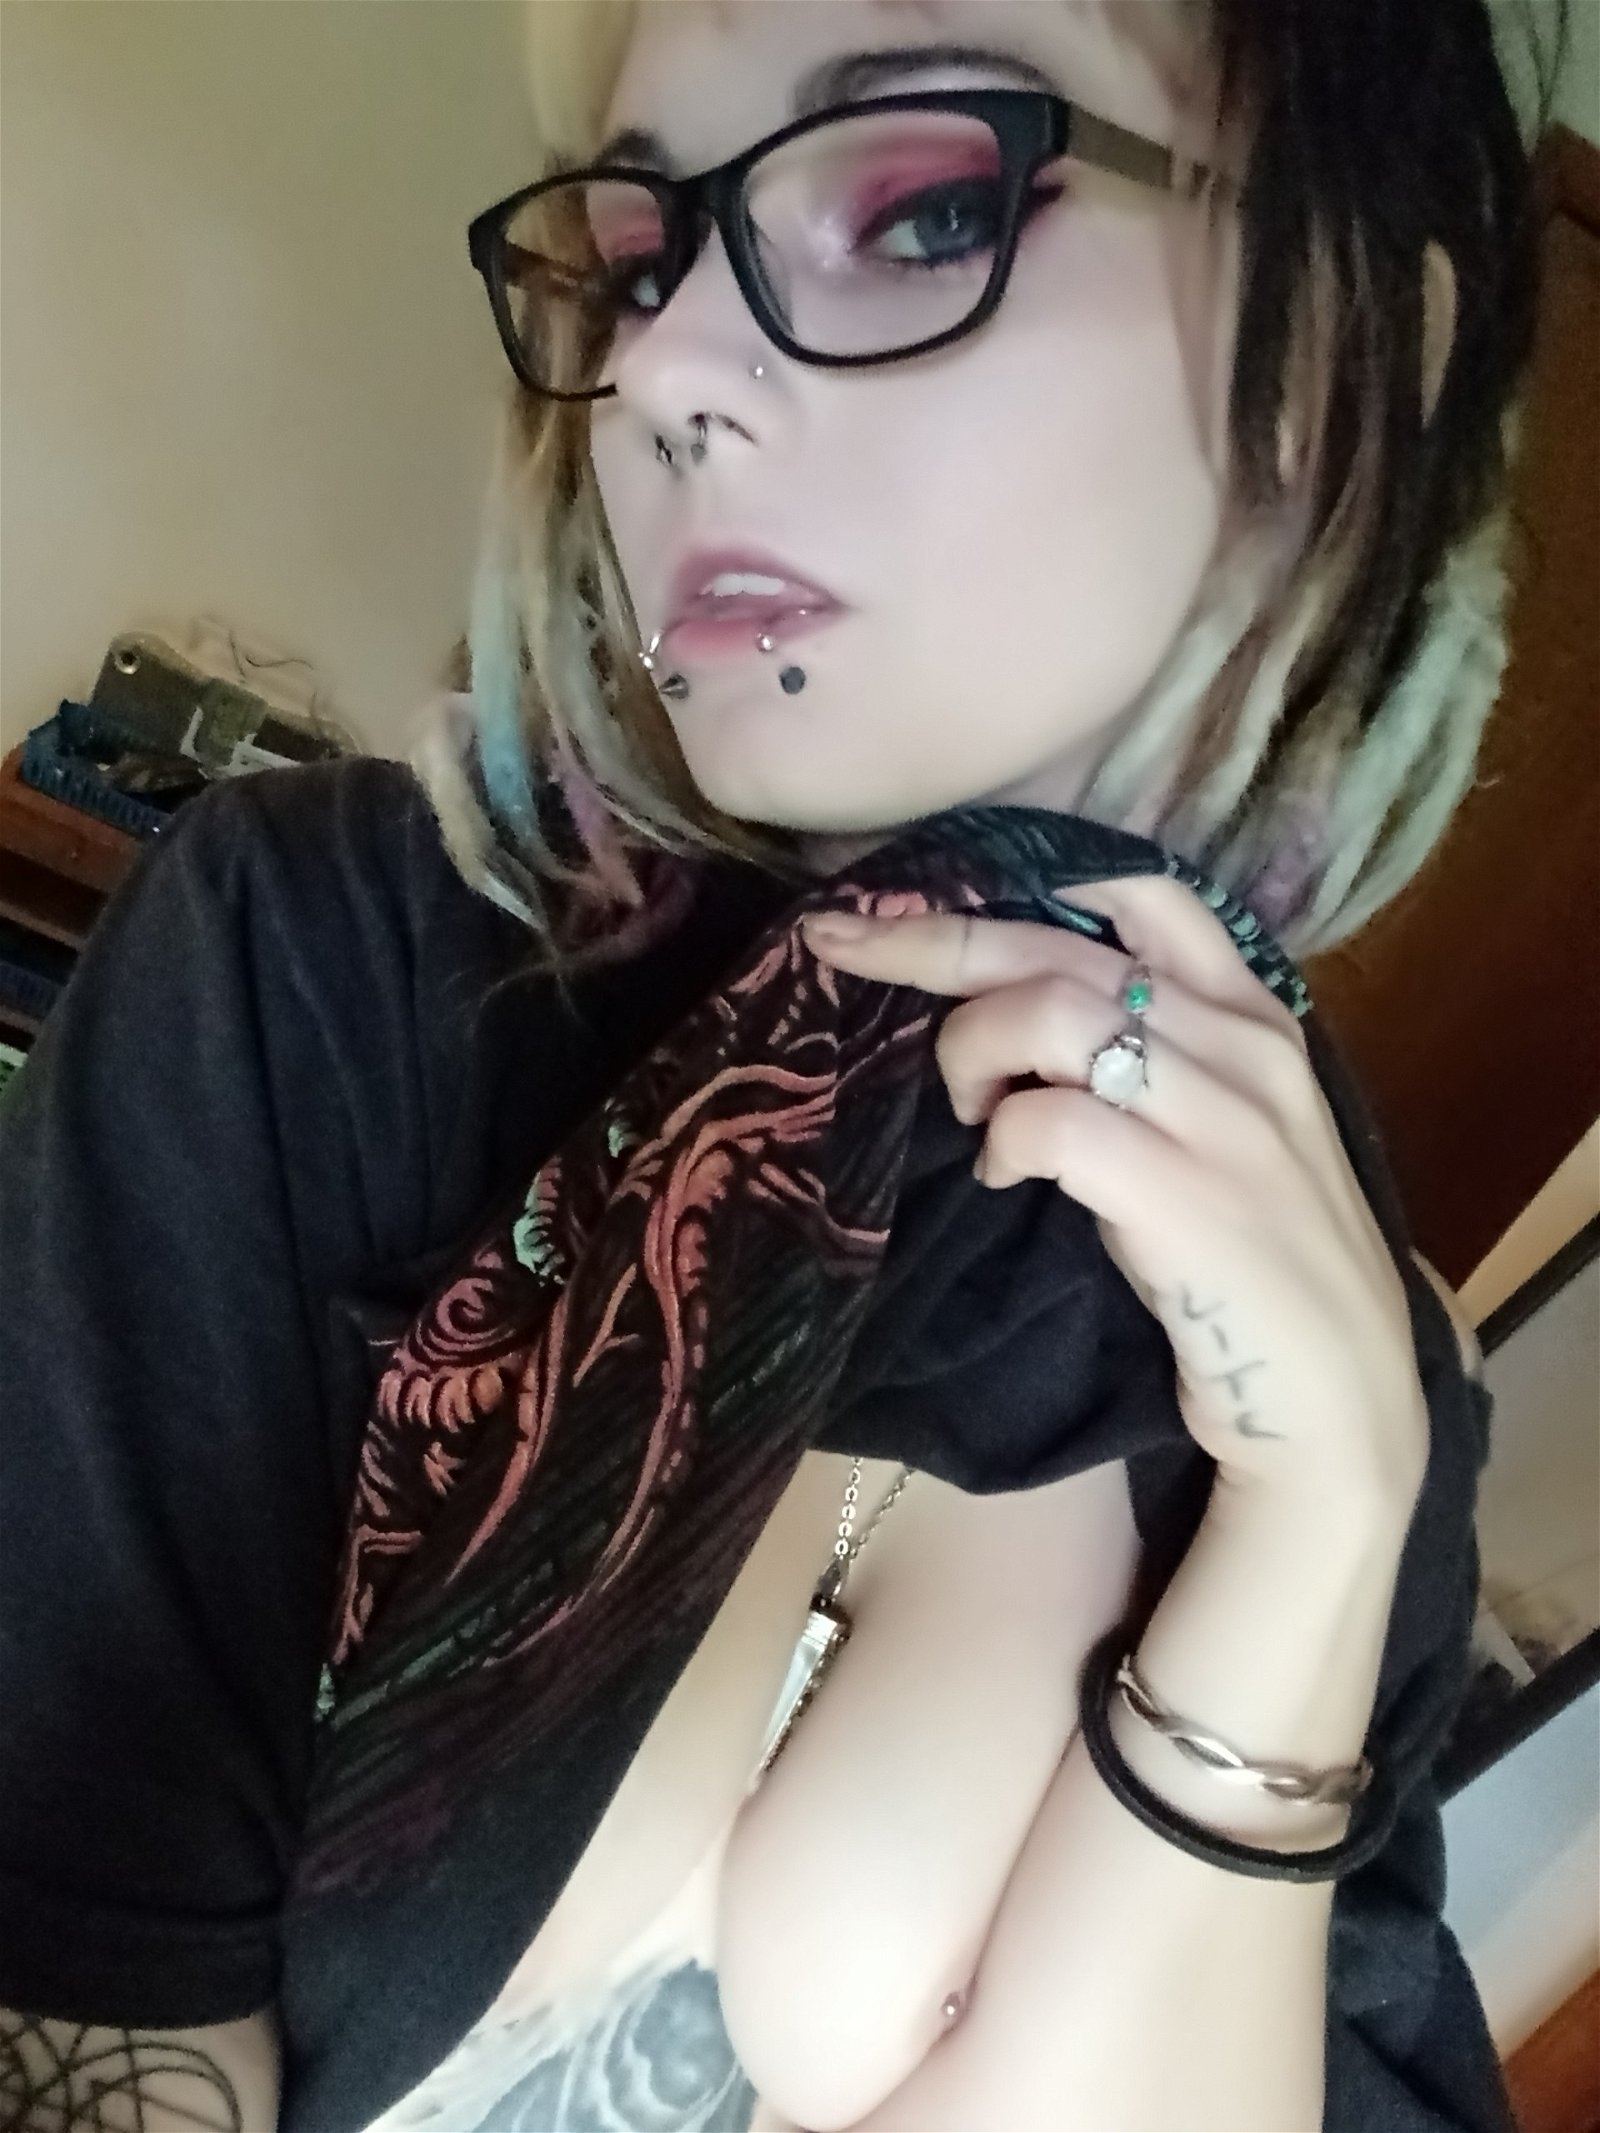 Photo by Princesskitten with the username @Princesskitten, who is a star user,  May 13, 2019 at 9:00 PM. The post is about the topic Hot Goth Girlfriend and the text says 'Who wants to watch me suck and fuck my boyfriend?'